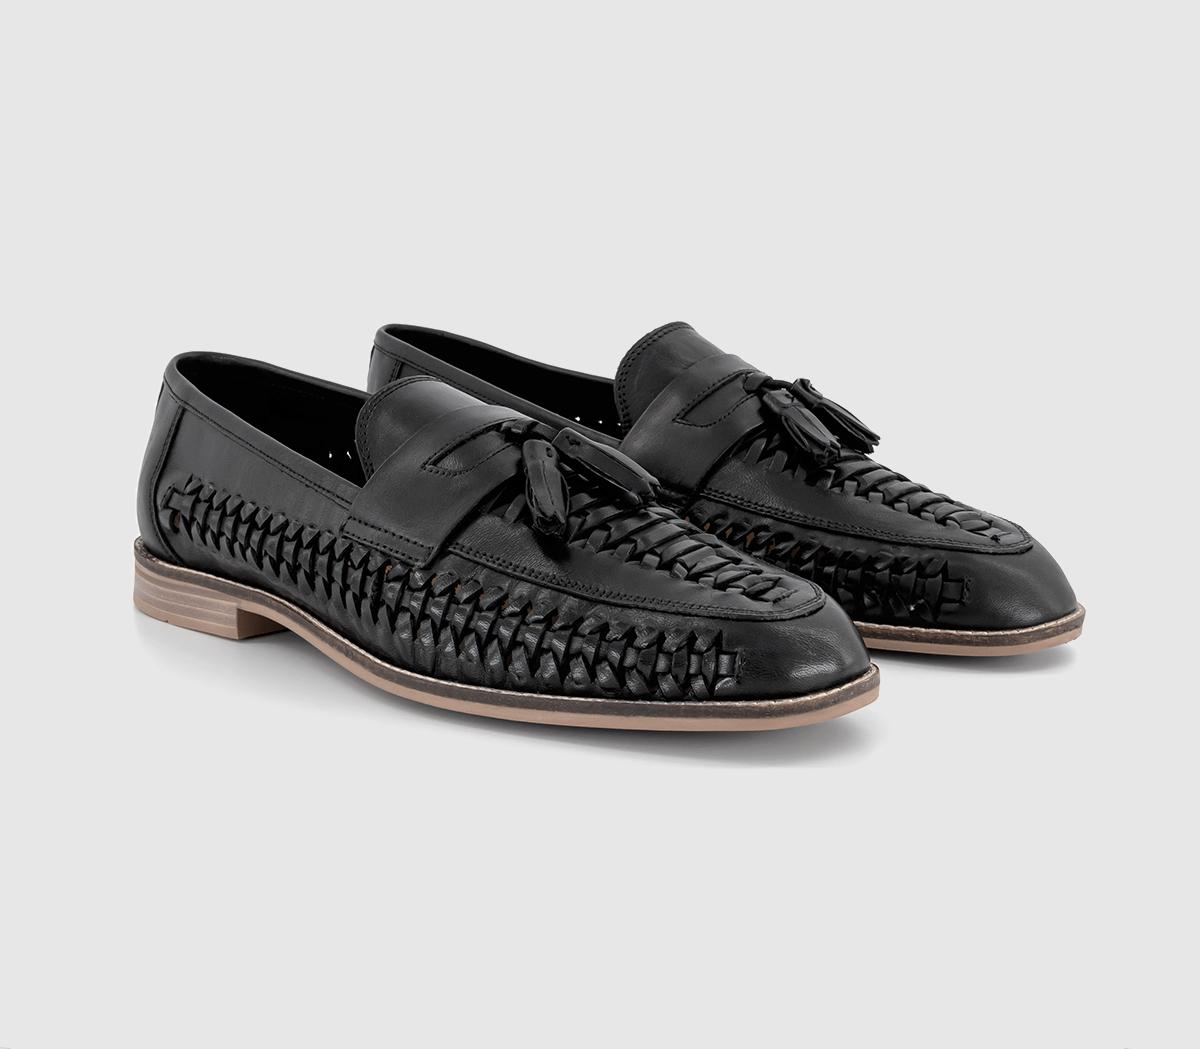 OFFICE Mens Clapham Tassel Woven Loafers Black Leather, 9